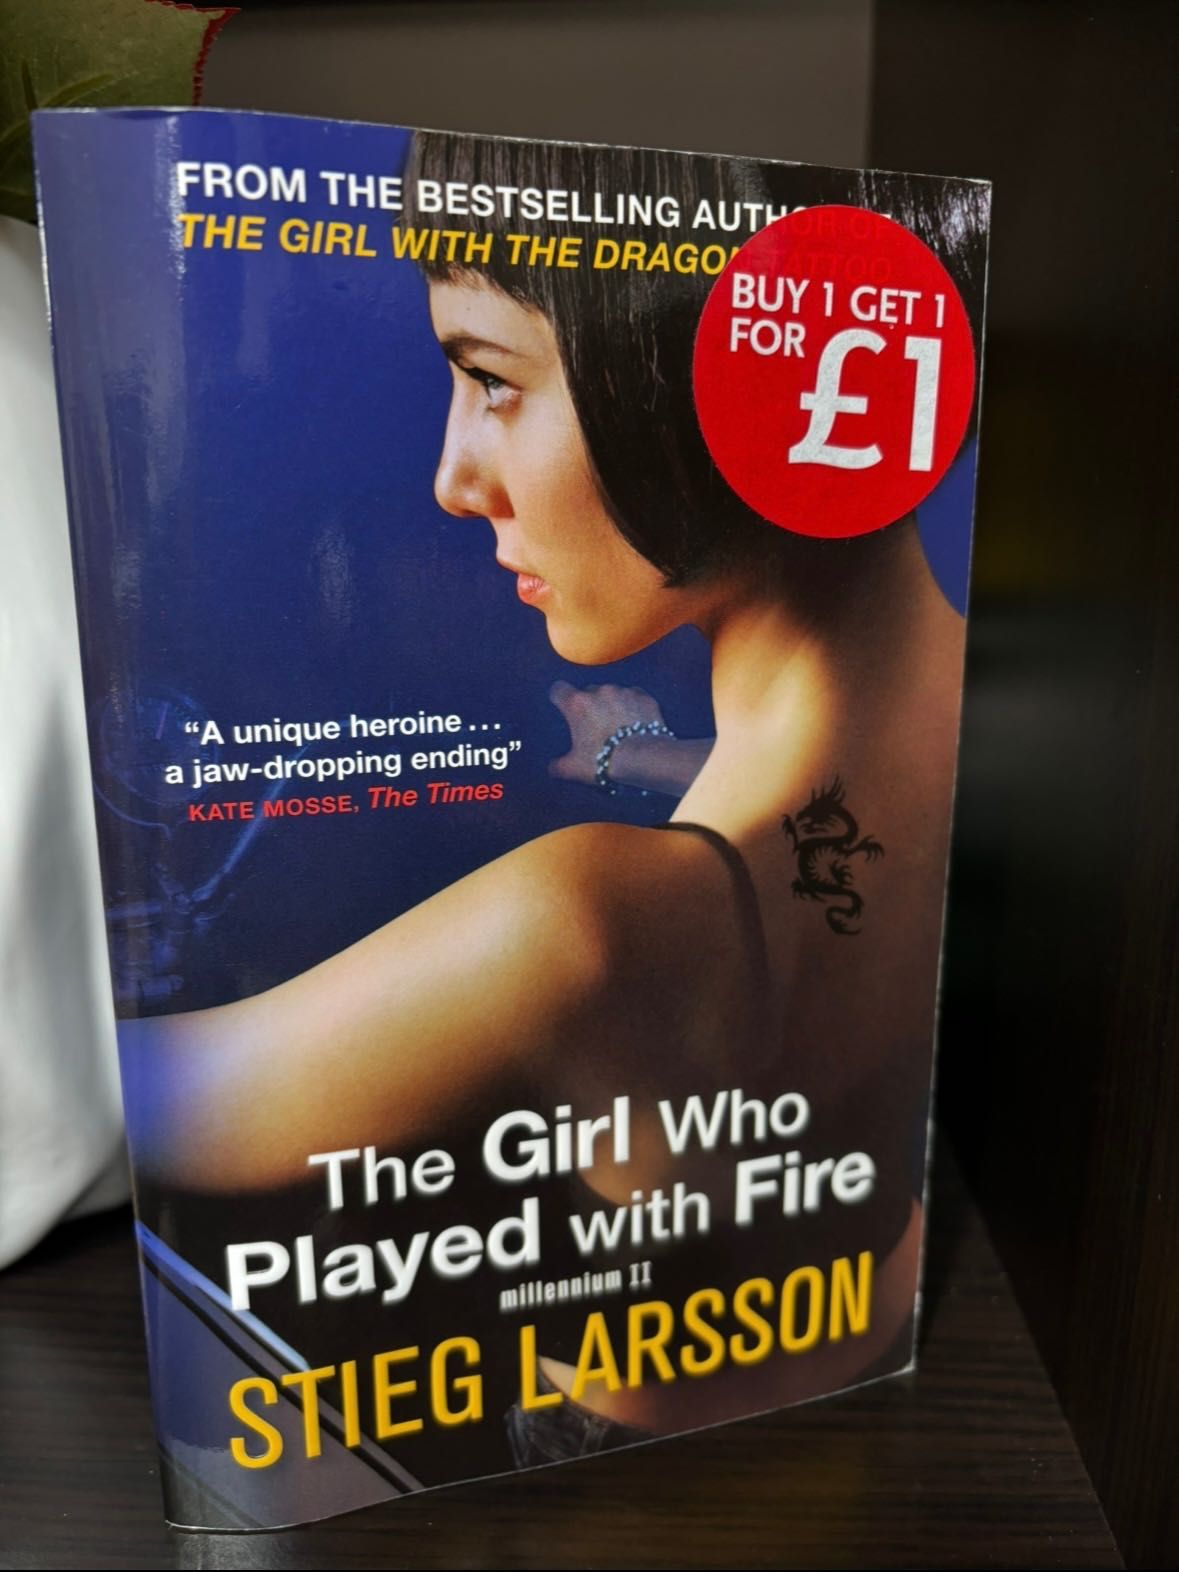 The Girl Who Played with Fire, Stieg Larsson